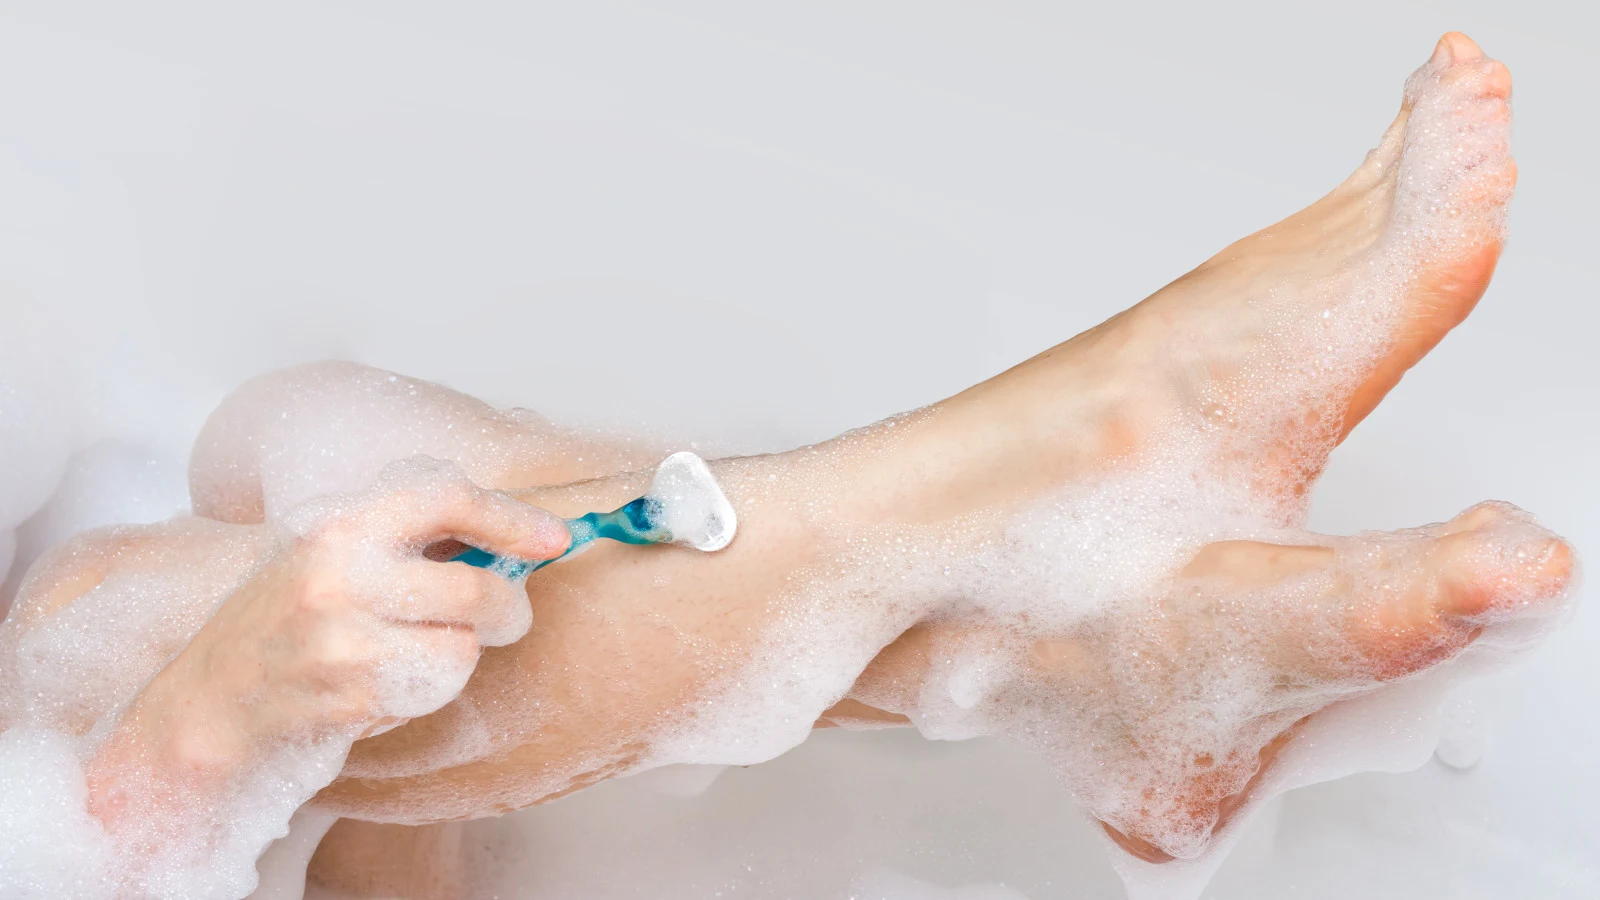 How To Exfoliate Legs: Beginner's Guide To Exfoliating Your Legs